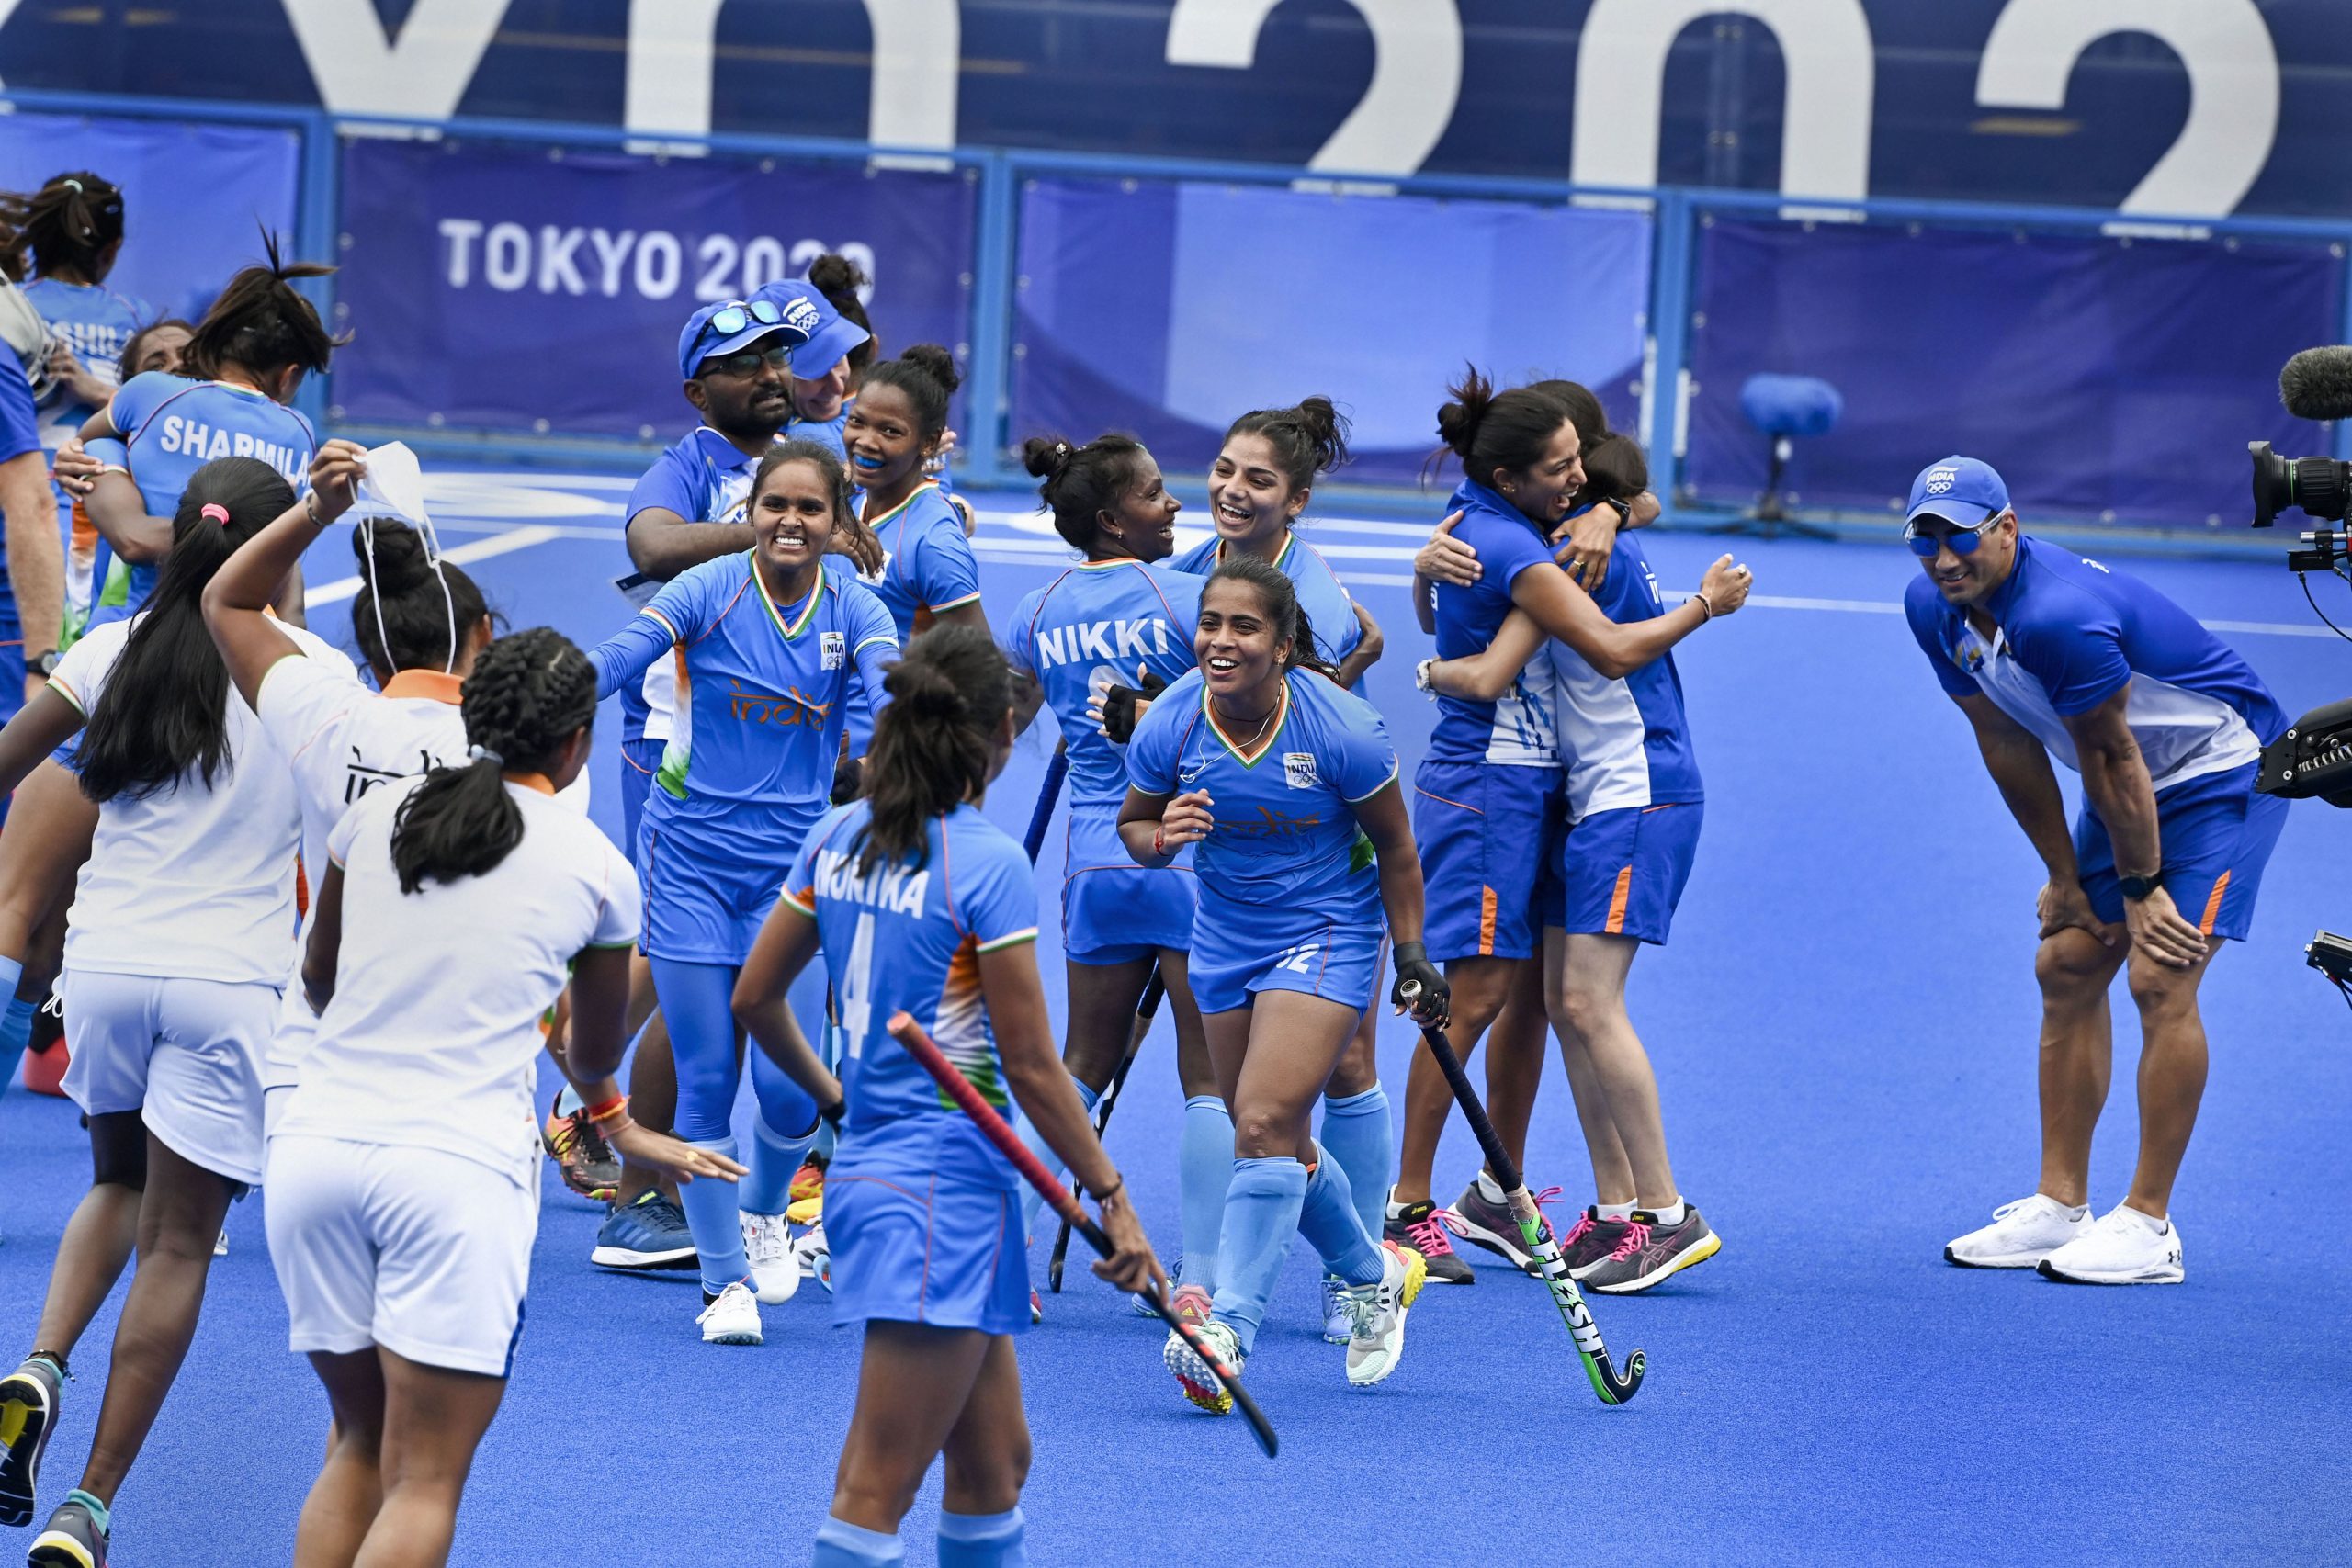 From underdogs to semi-finalists: Indian eves’ Tokyo 2020 hockey comeback